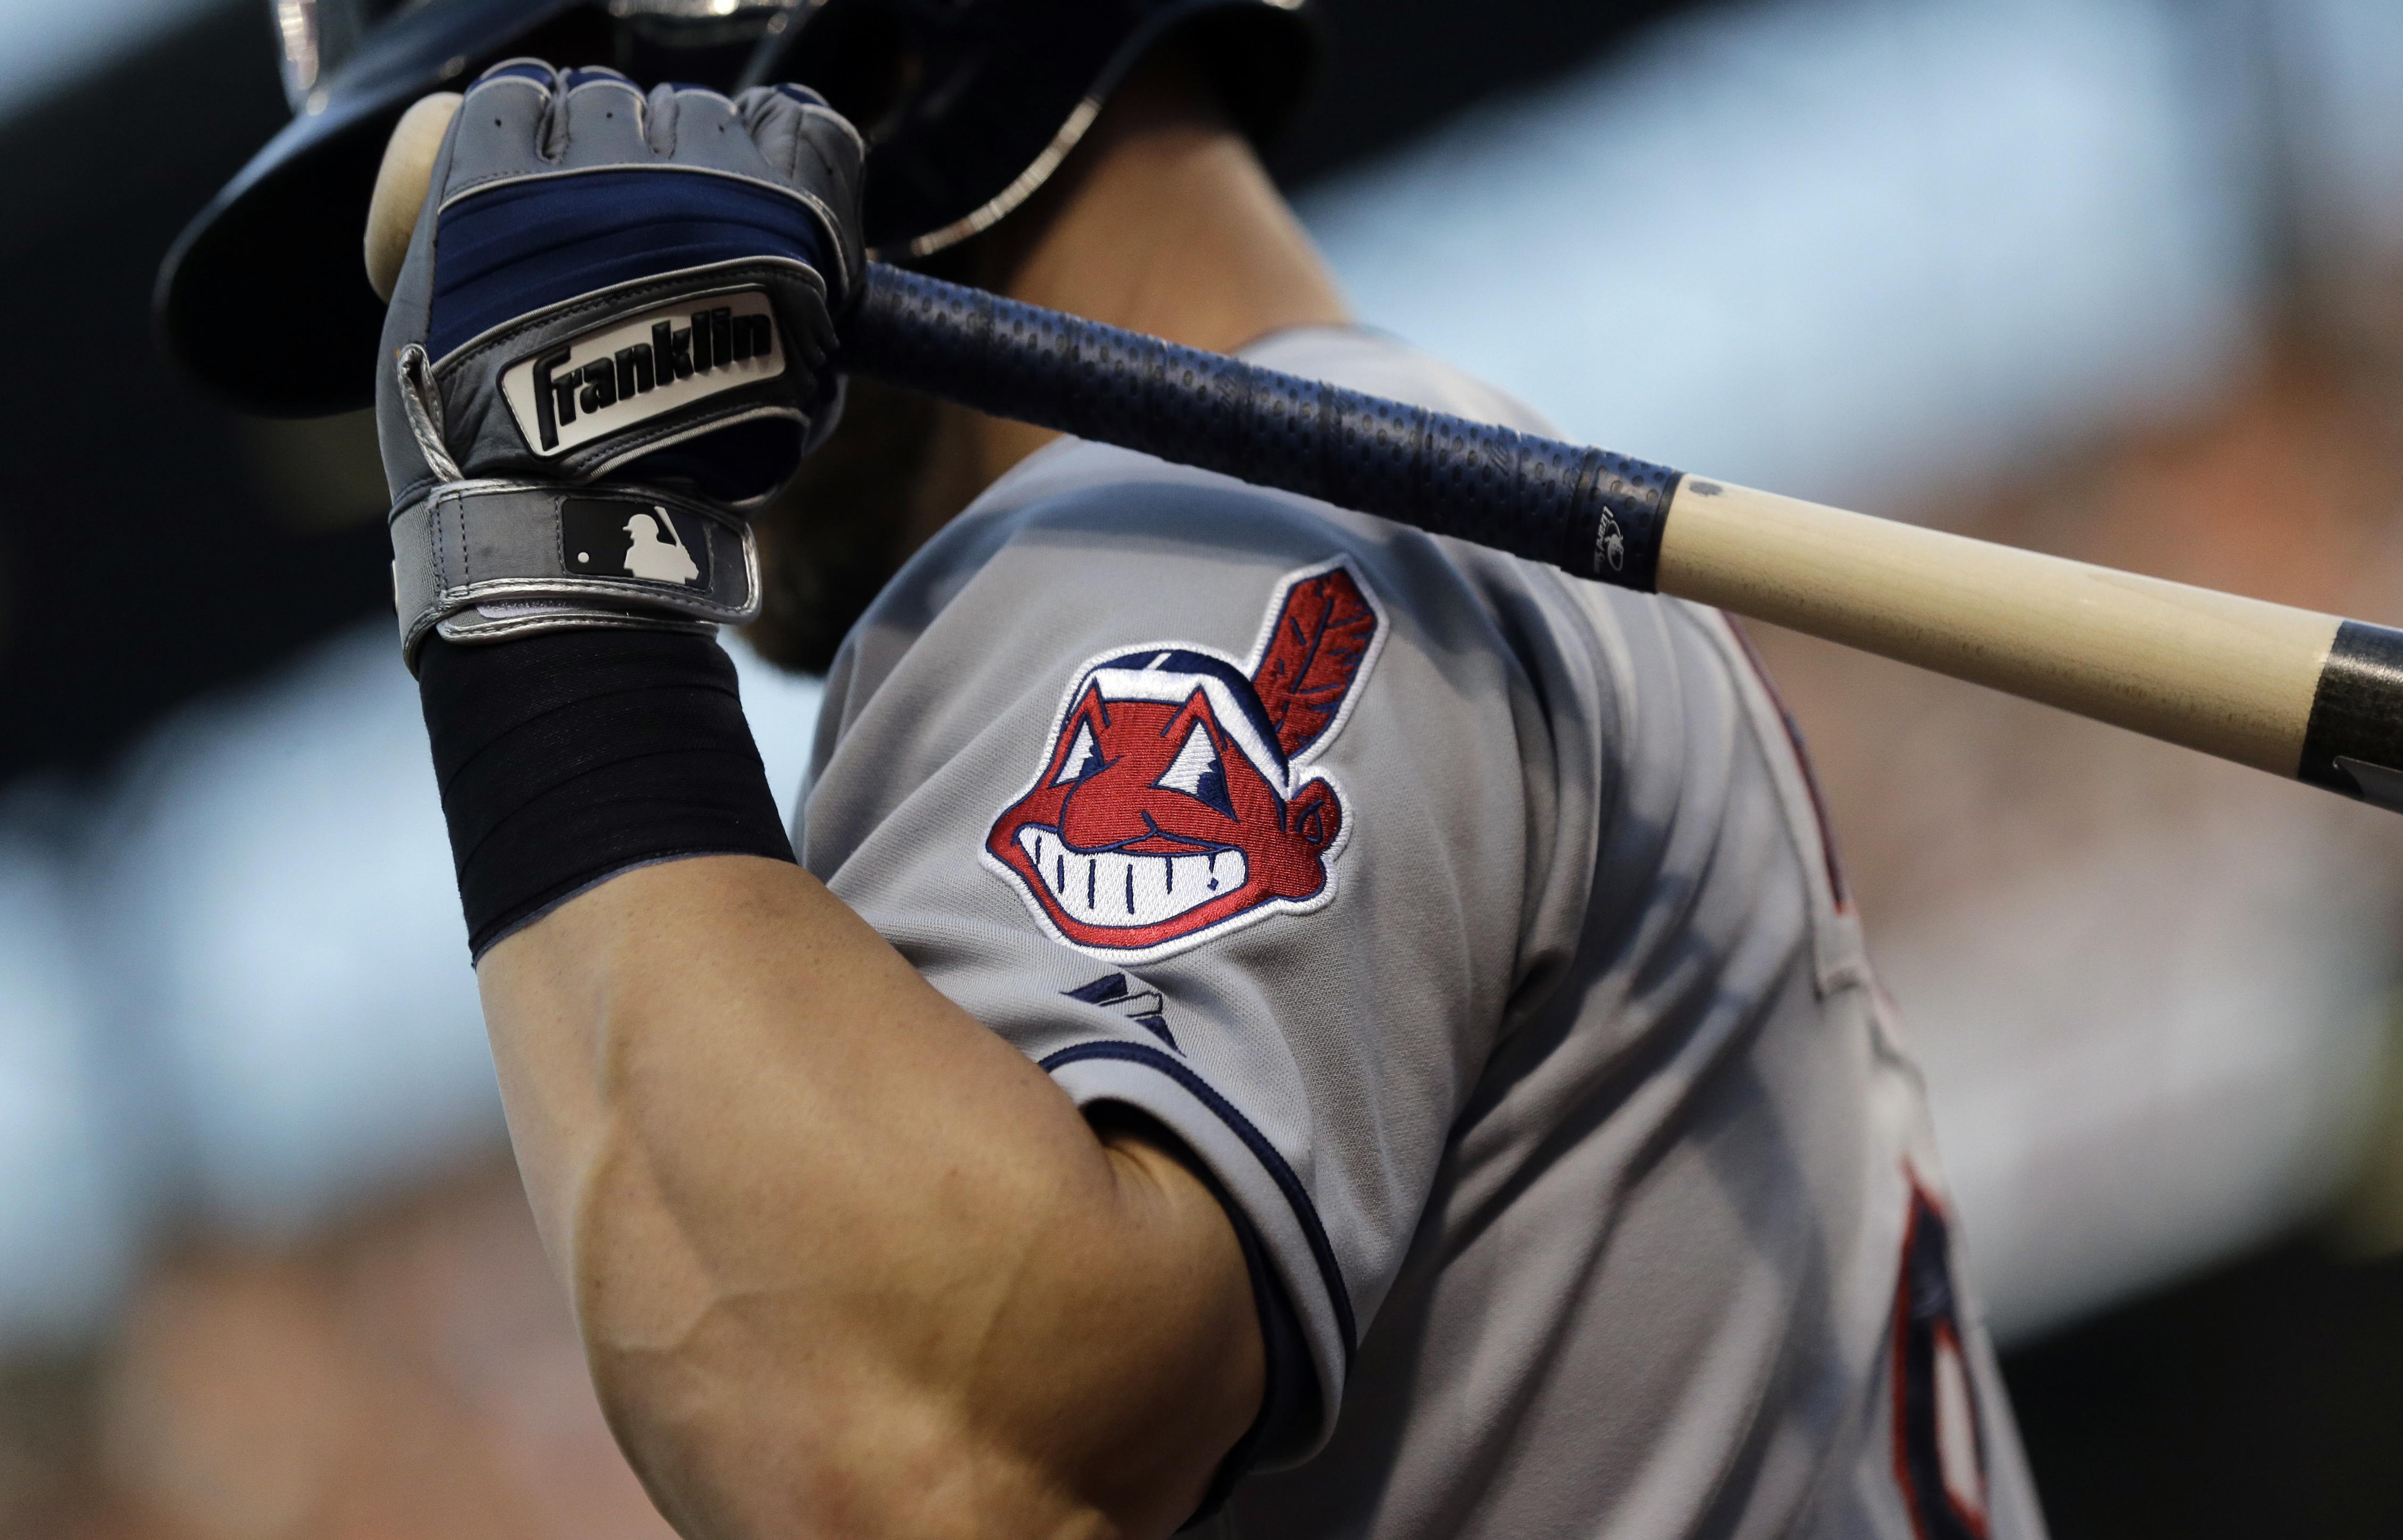 Robert Roche battles Chief Wahoo, the Cleveland Indians and